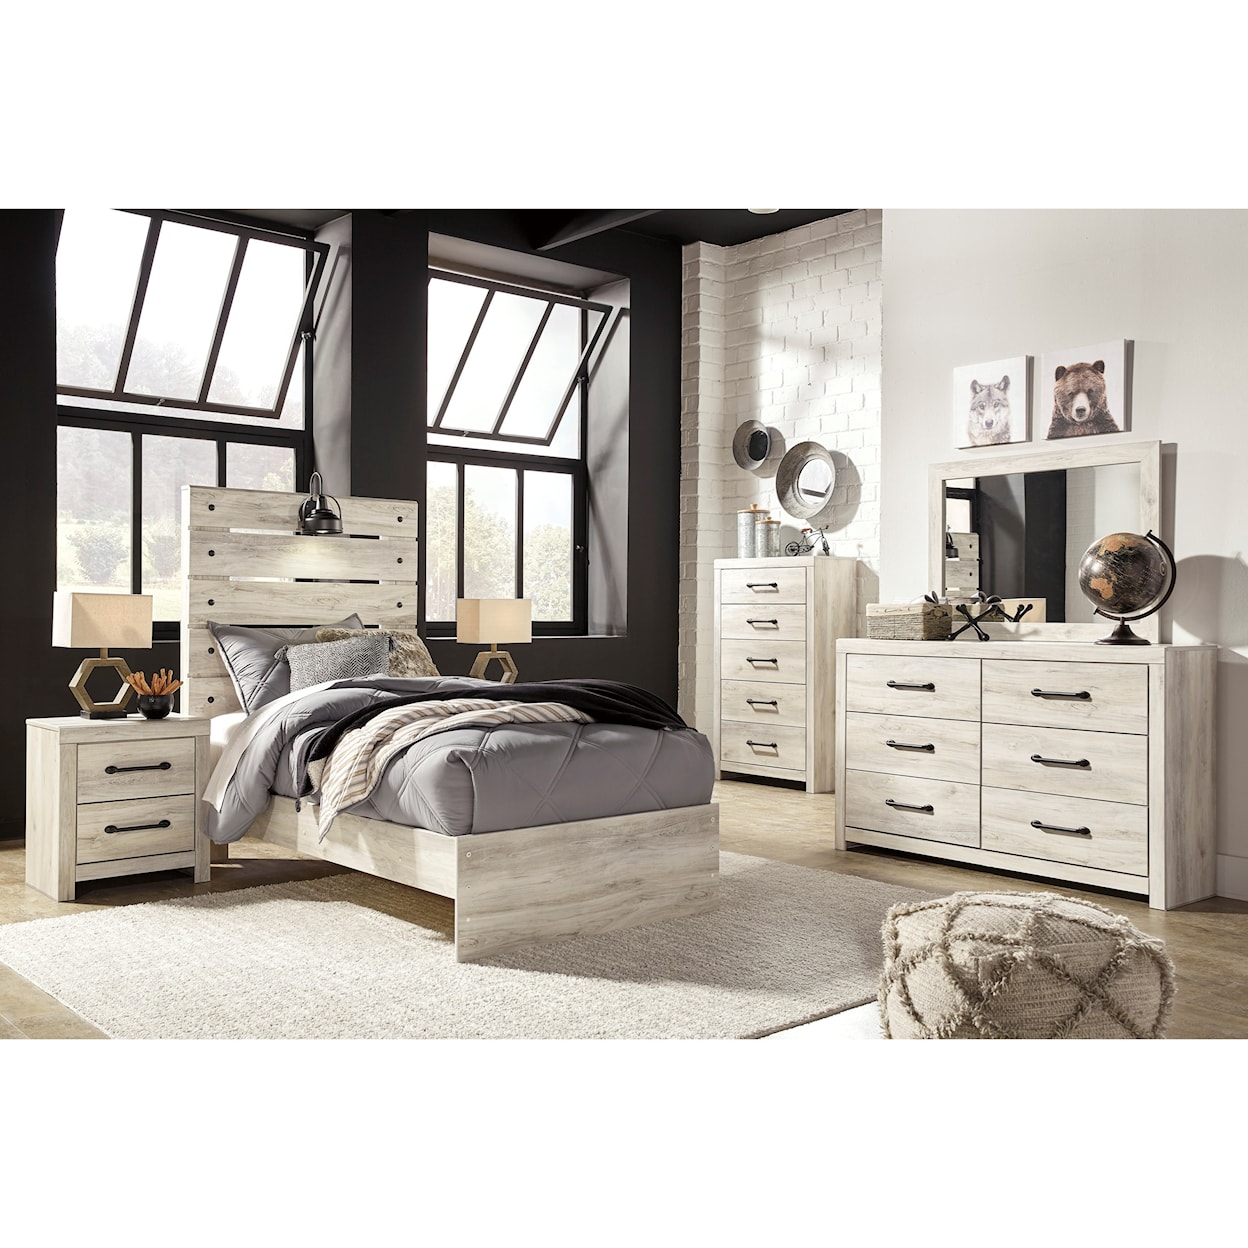 StyleLine APOLLO2 DYLAN Twin Bedroom Group